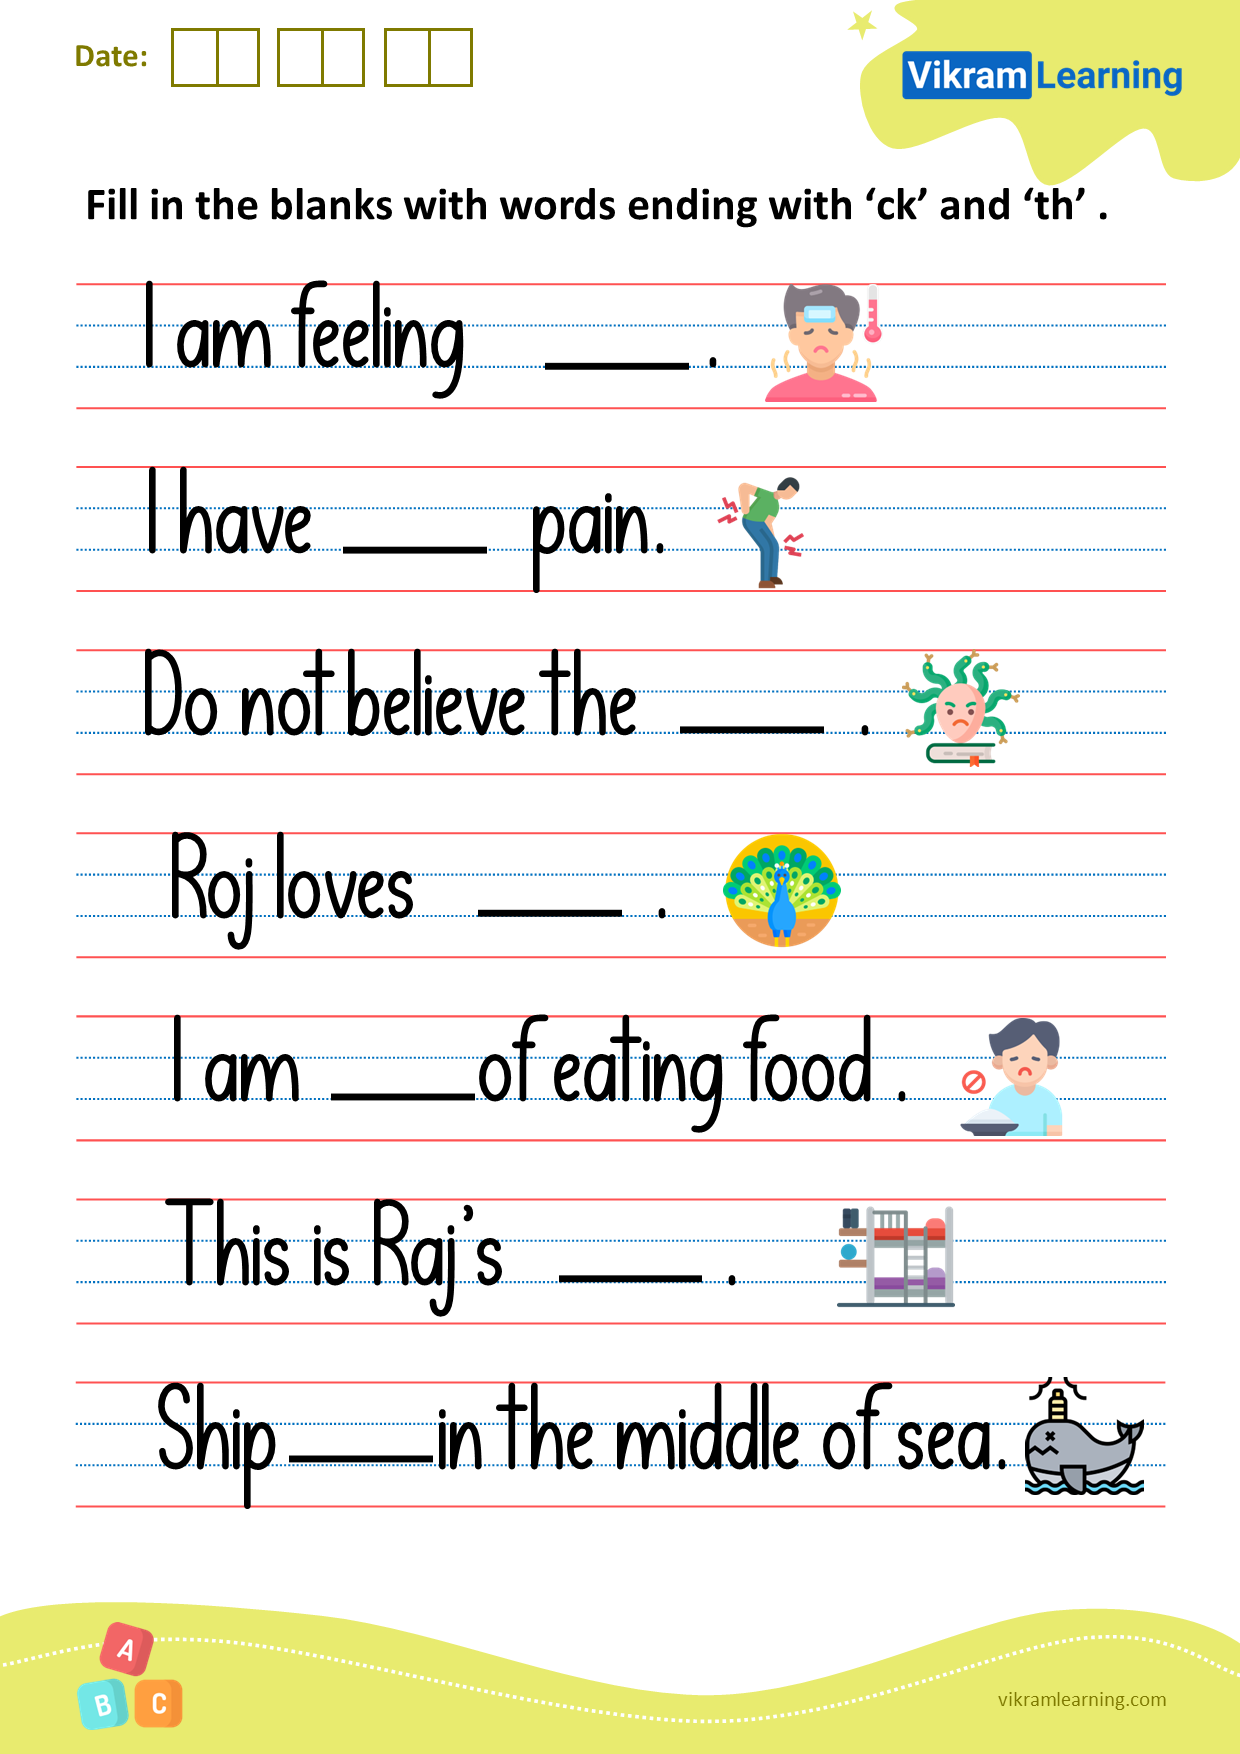 Download fill in the blanks with words ending with ‘ck’ and ‘th’ worksheets